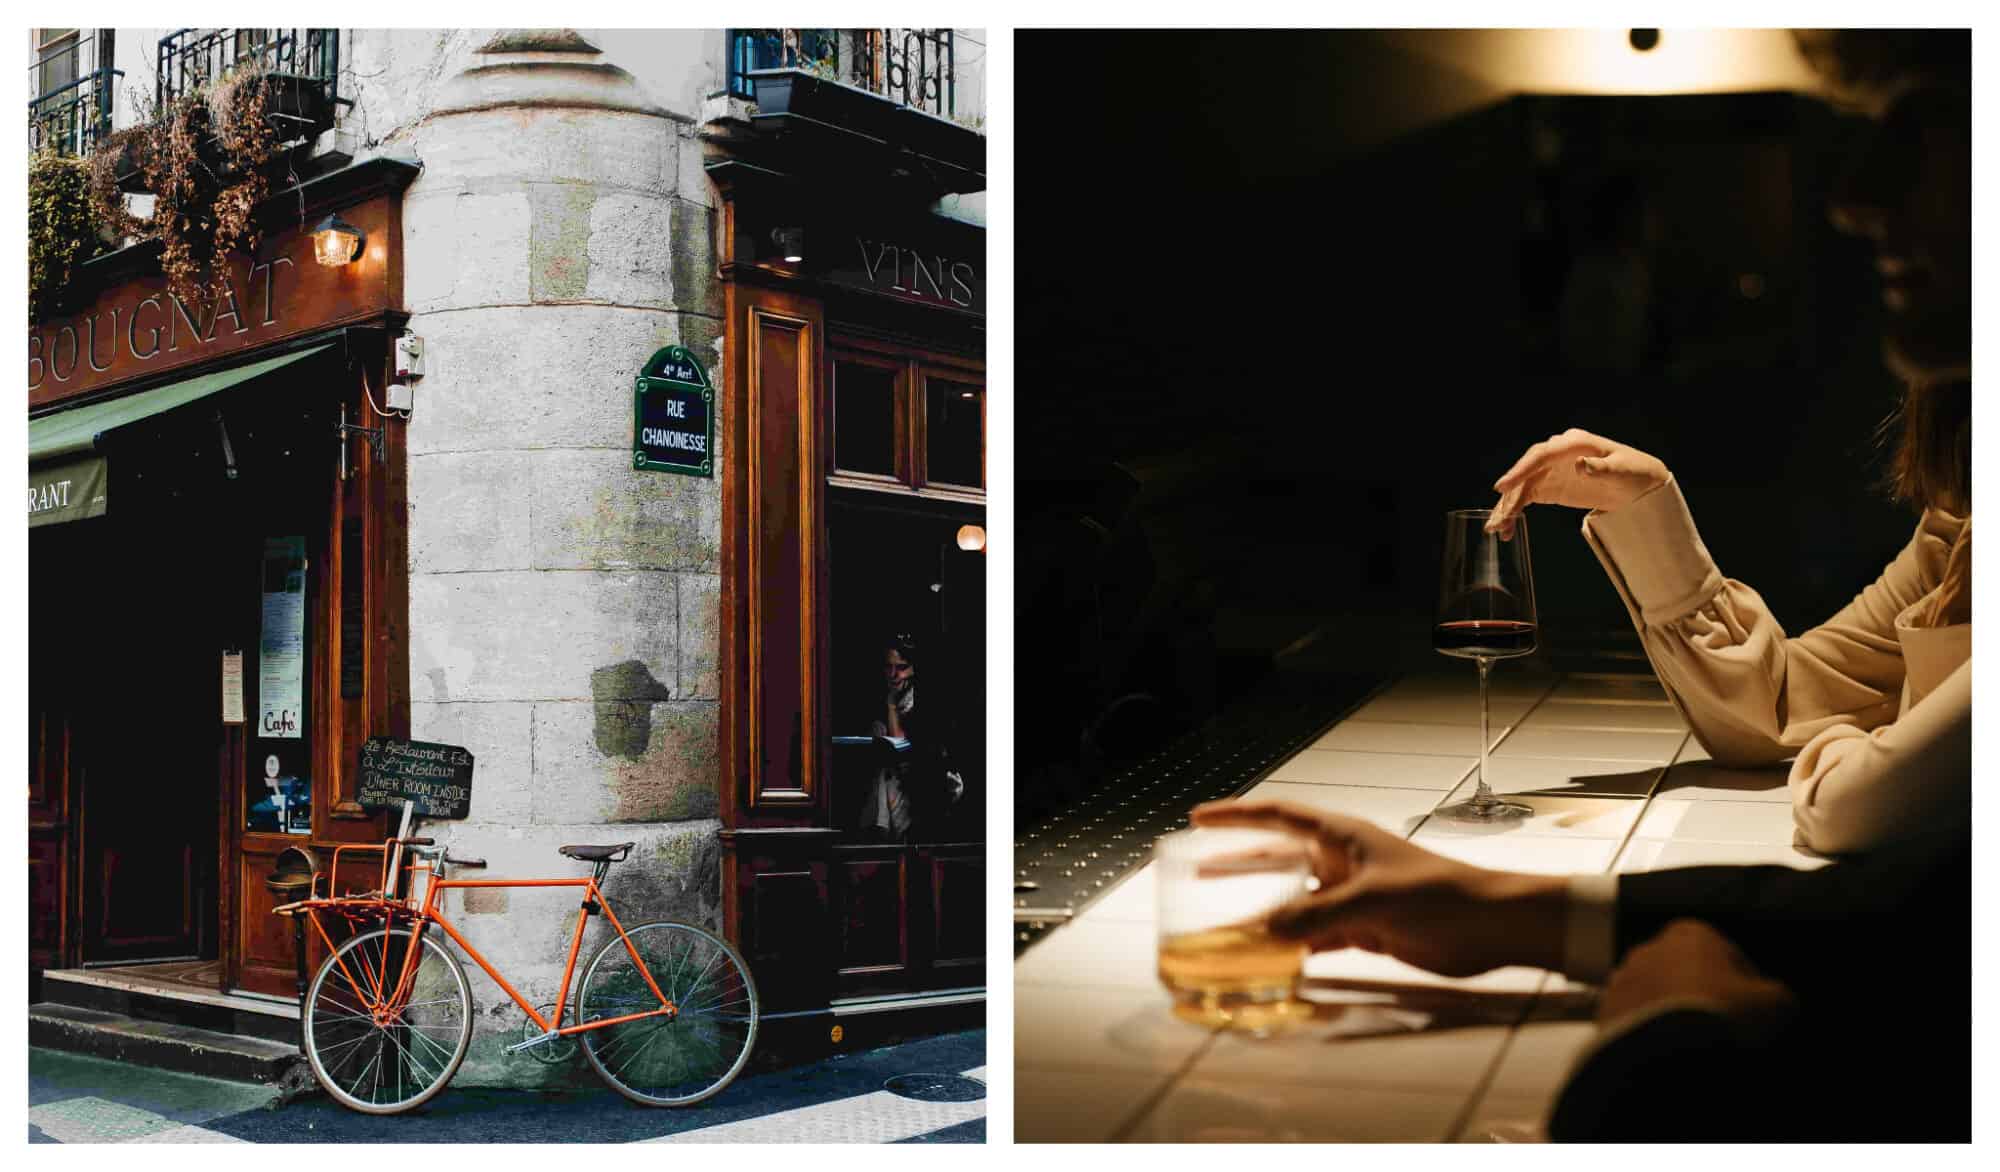 Left: Bike in Parisian street; Right: Man and woman drinking whiskey and a glass of wine at a bar in Paris